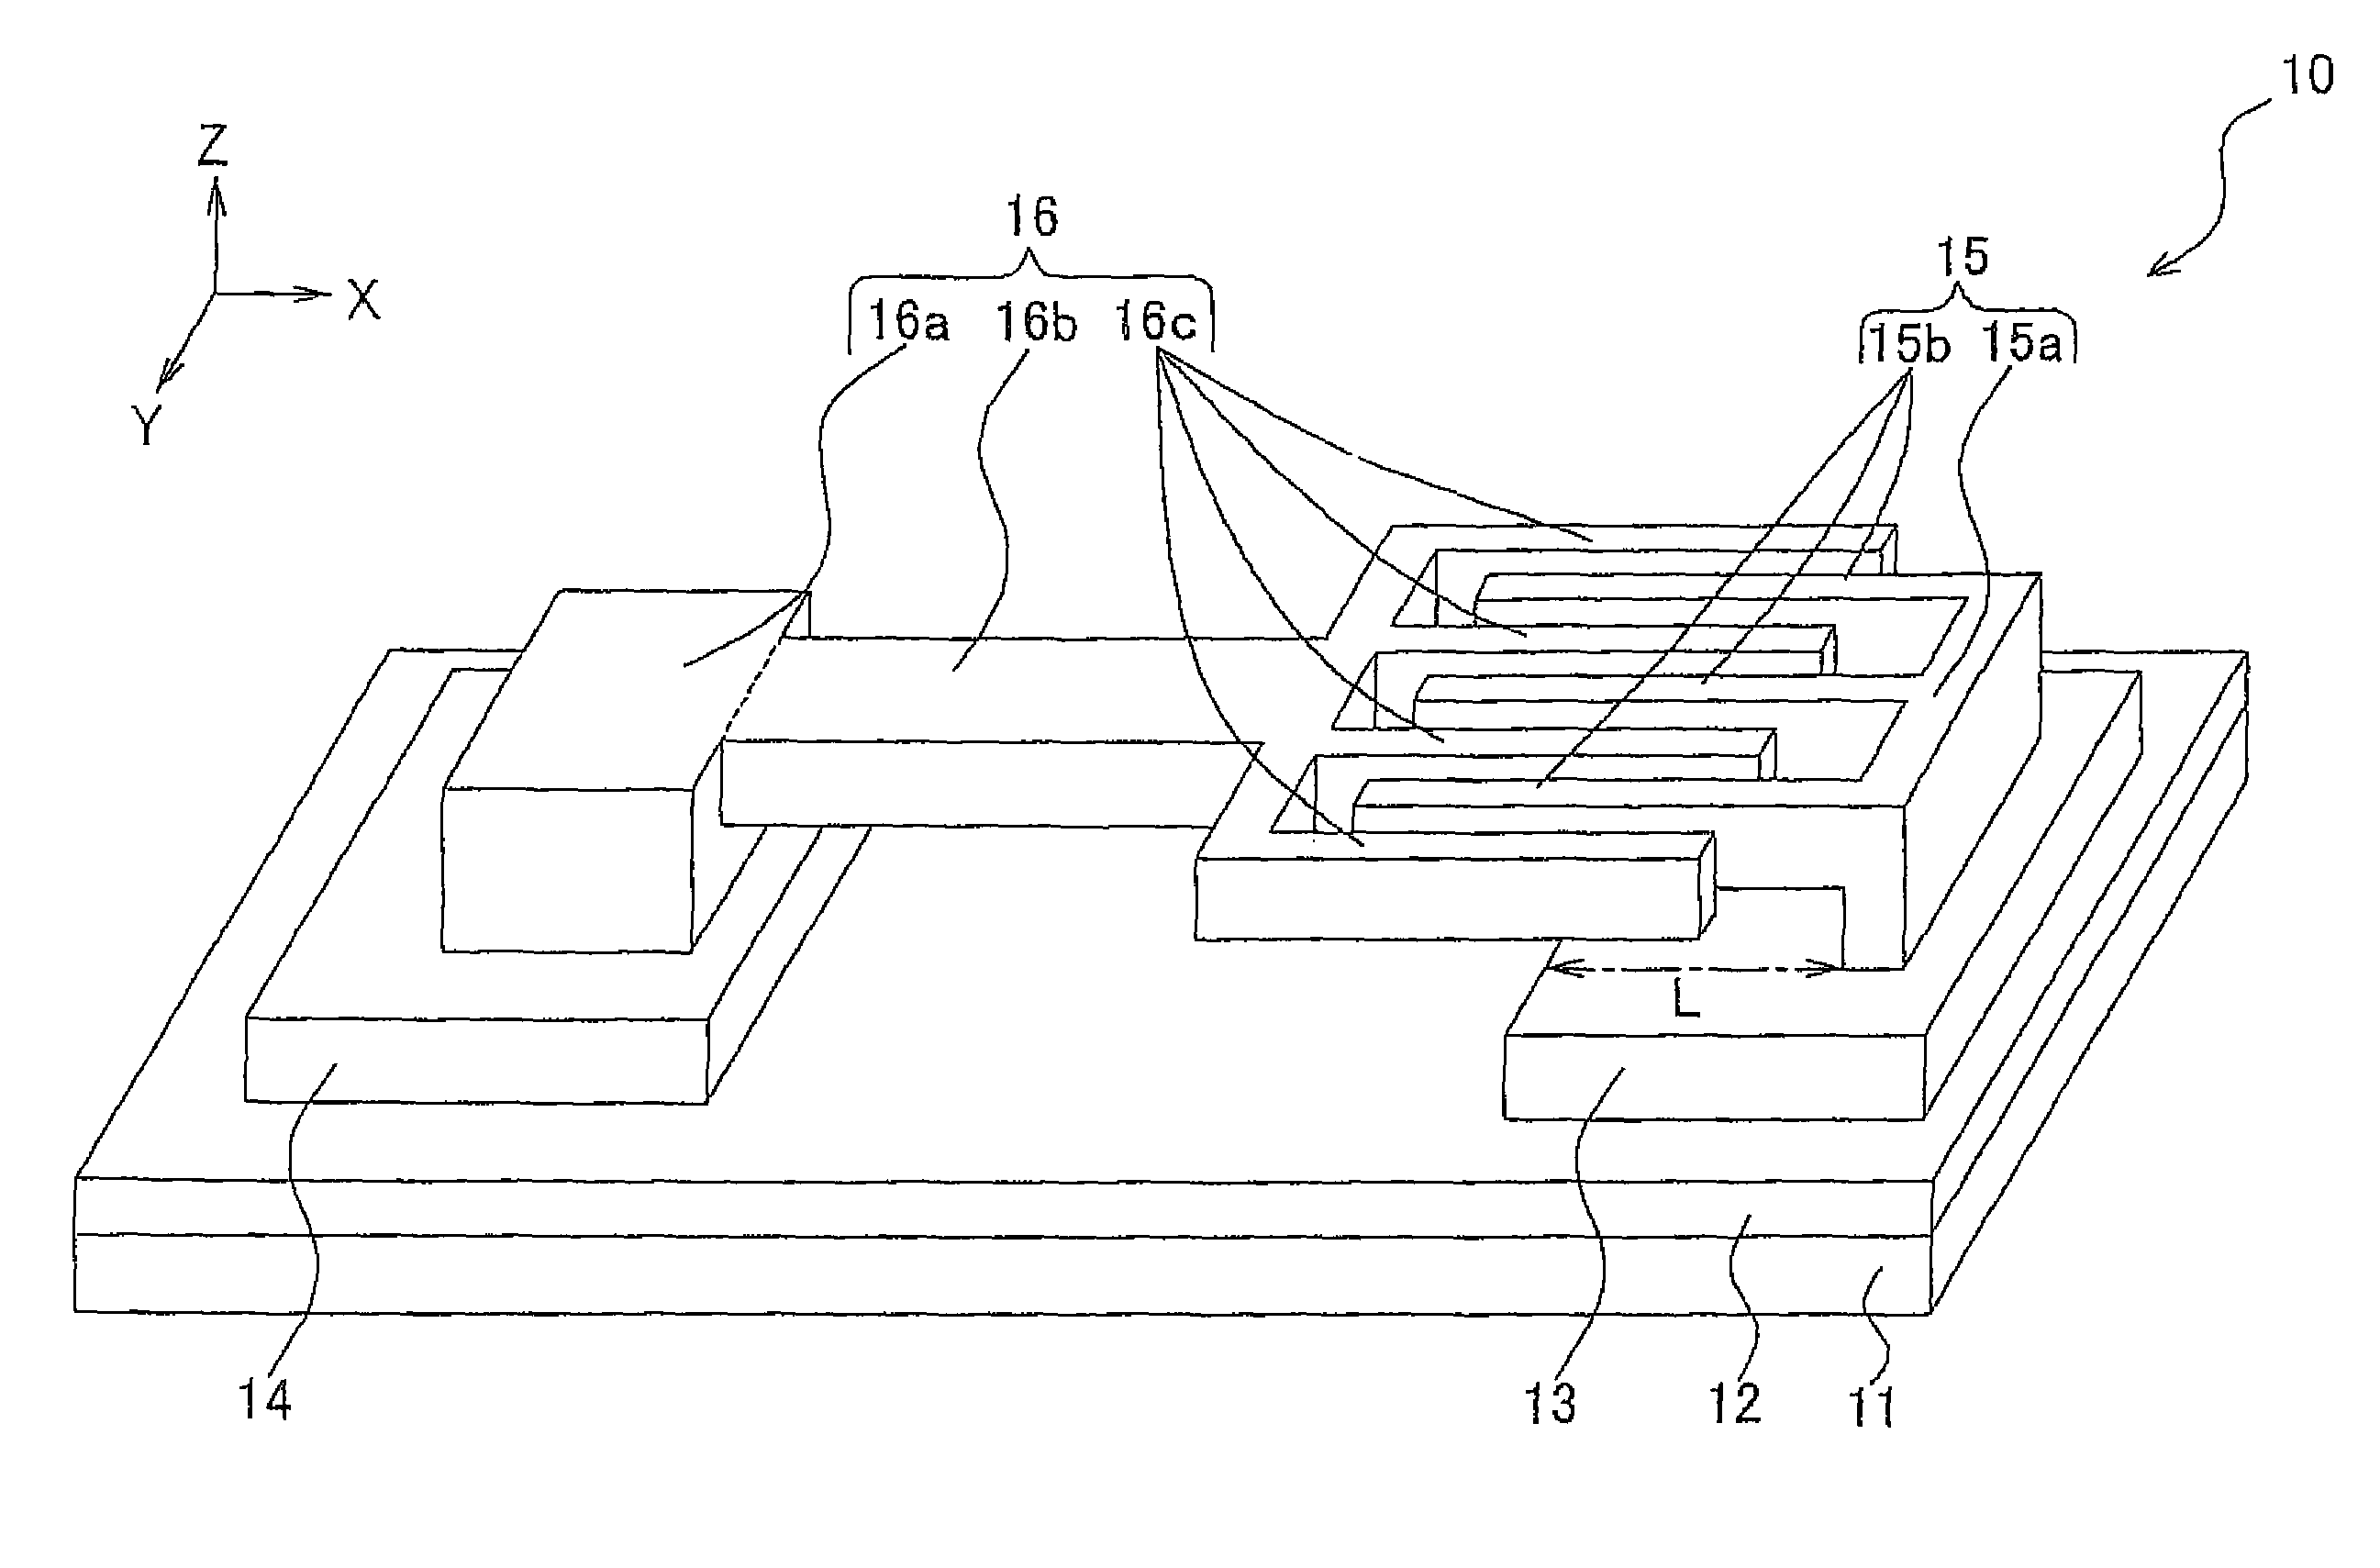 Resonator having an output electrode underneath first and second electrode arms